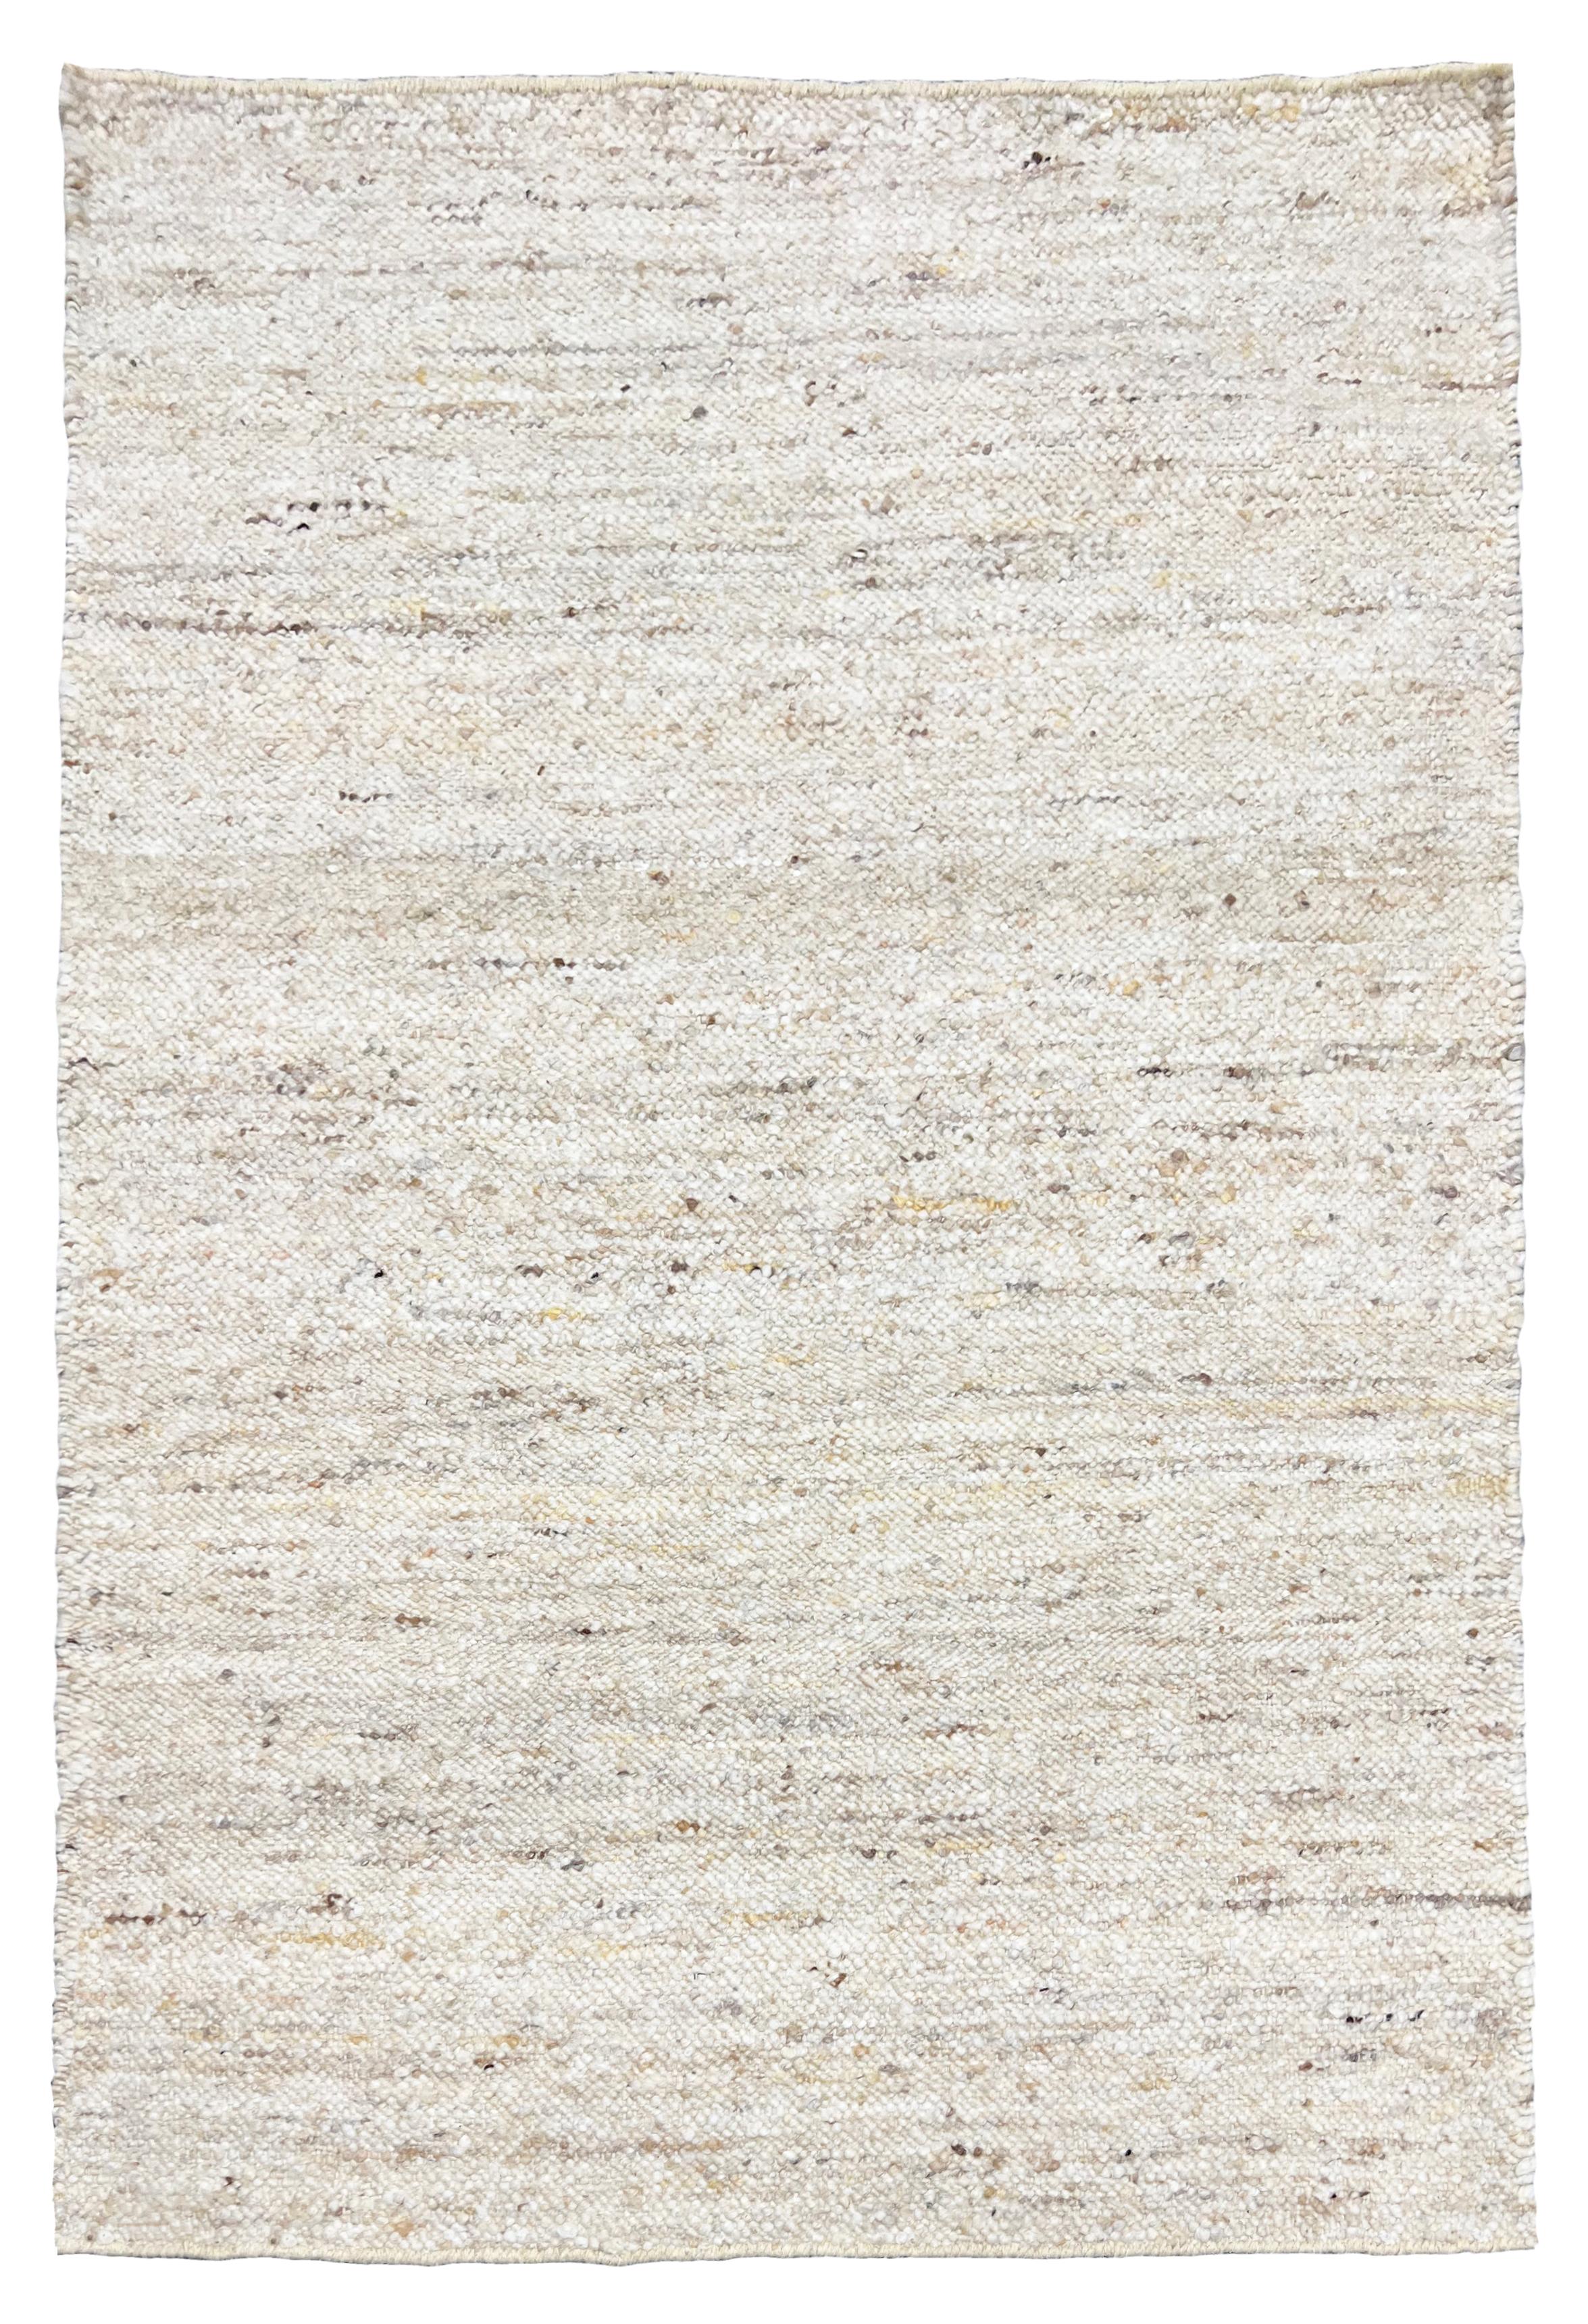 9' x 12'

Hand knotted, flat-weave raw wool

Origin: India

Field Color: Ivory

Accent Colors: Brown, Beige